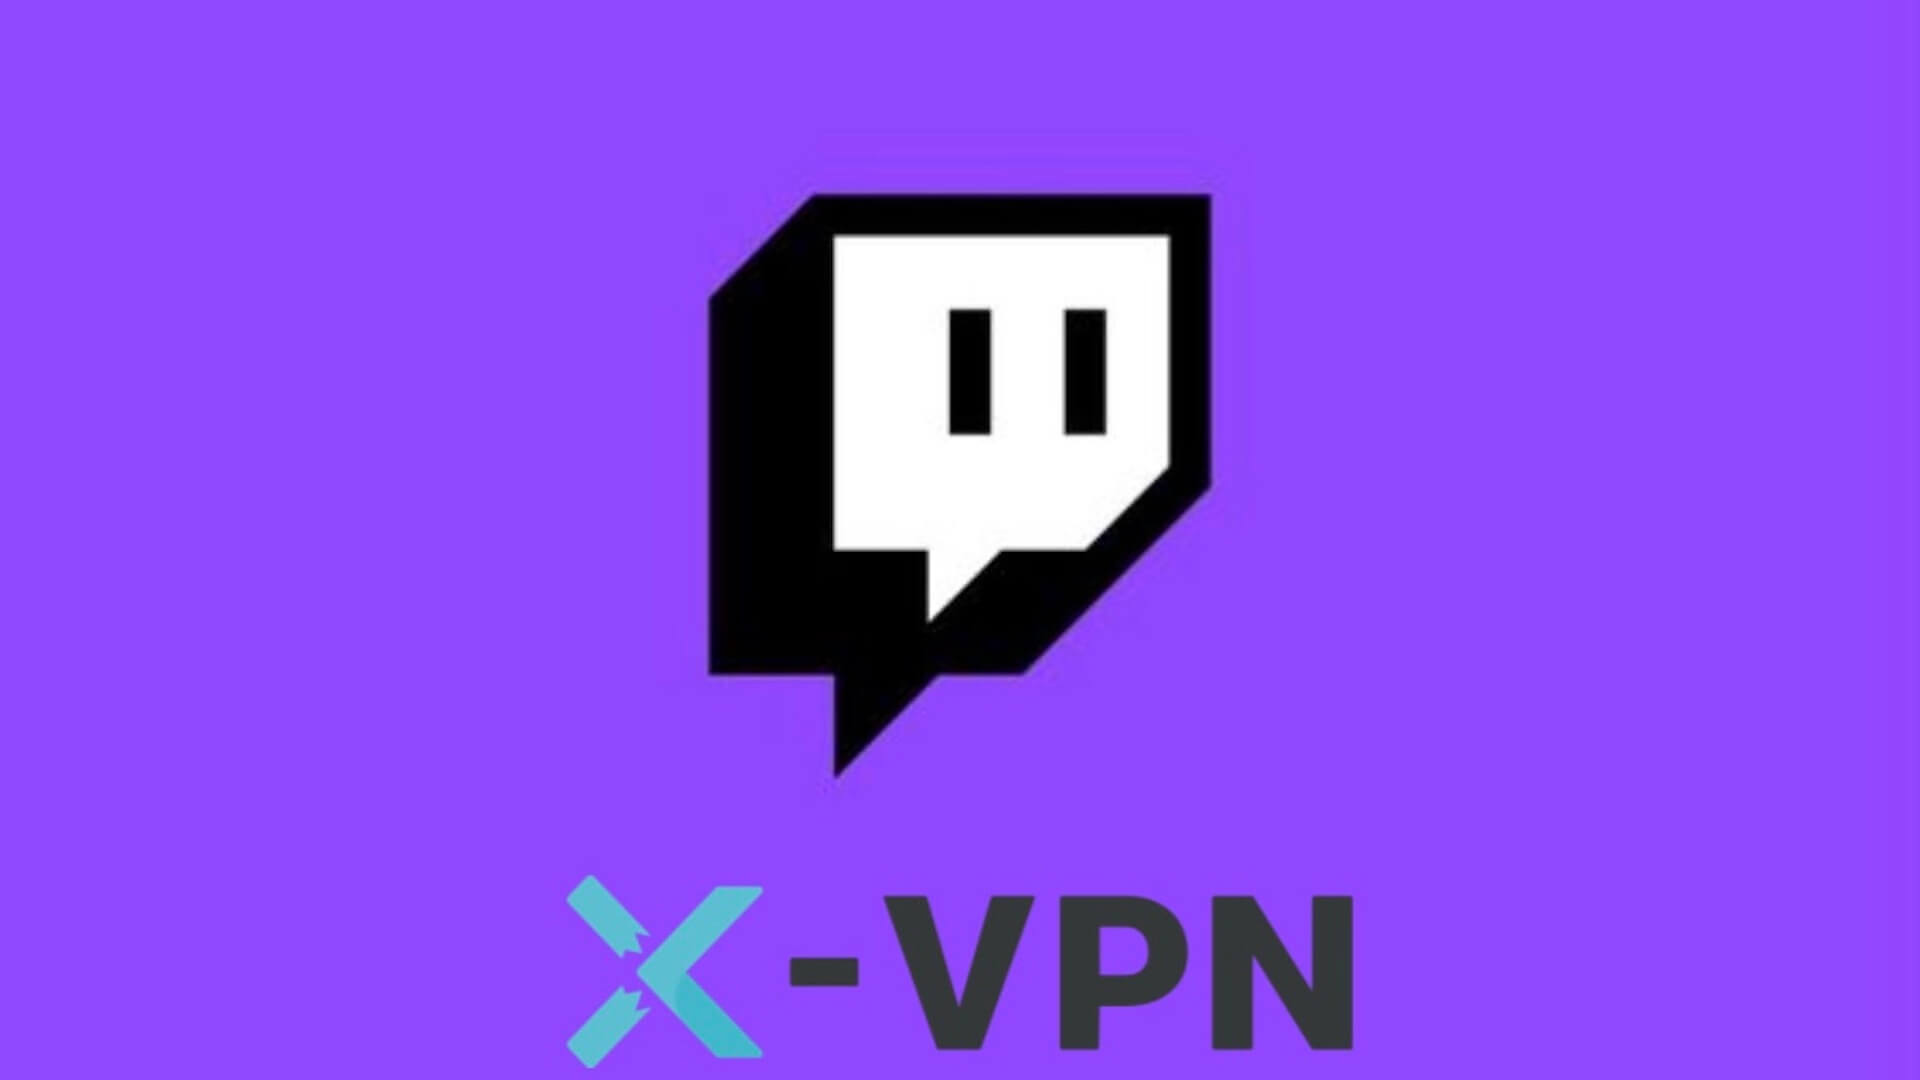 Secure your privacy on Twitch with X-VPN